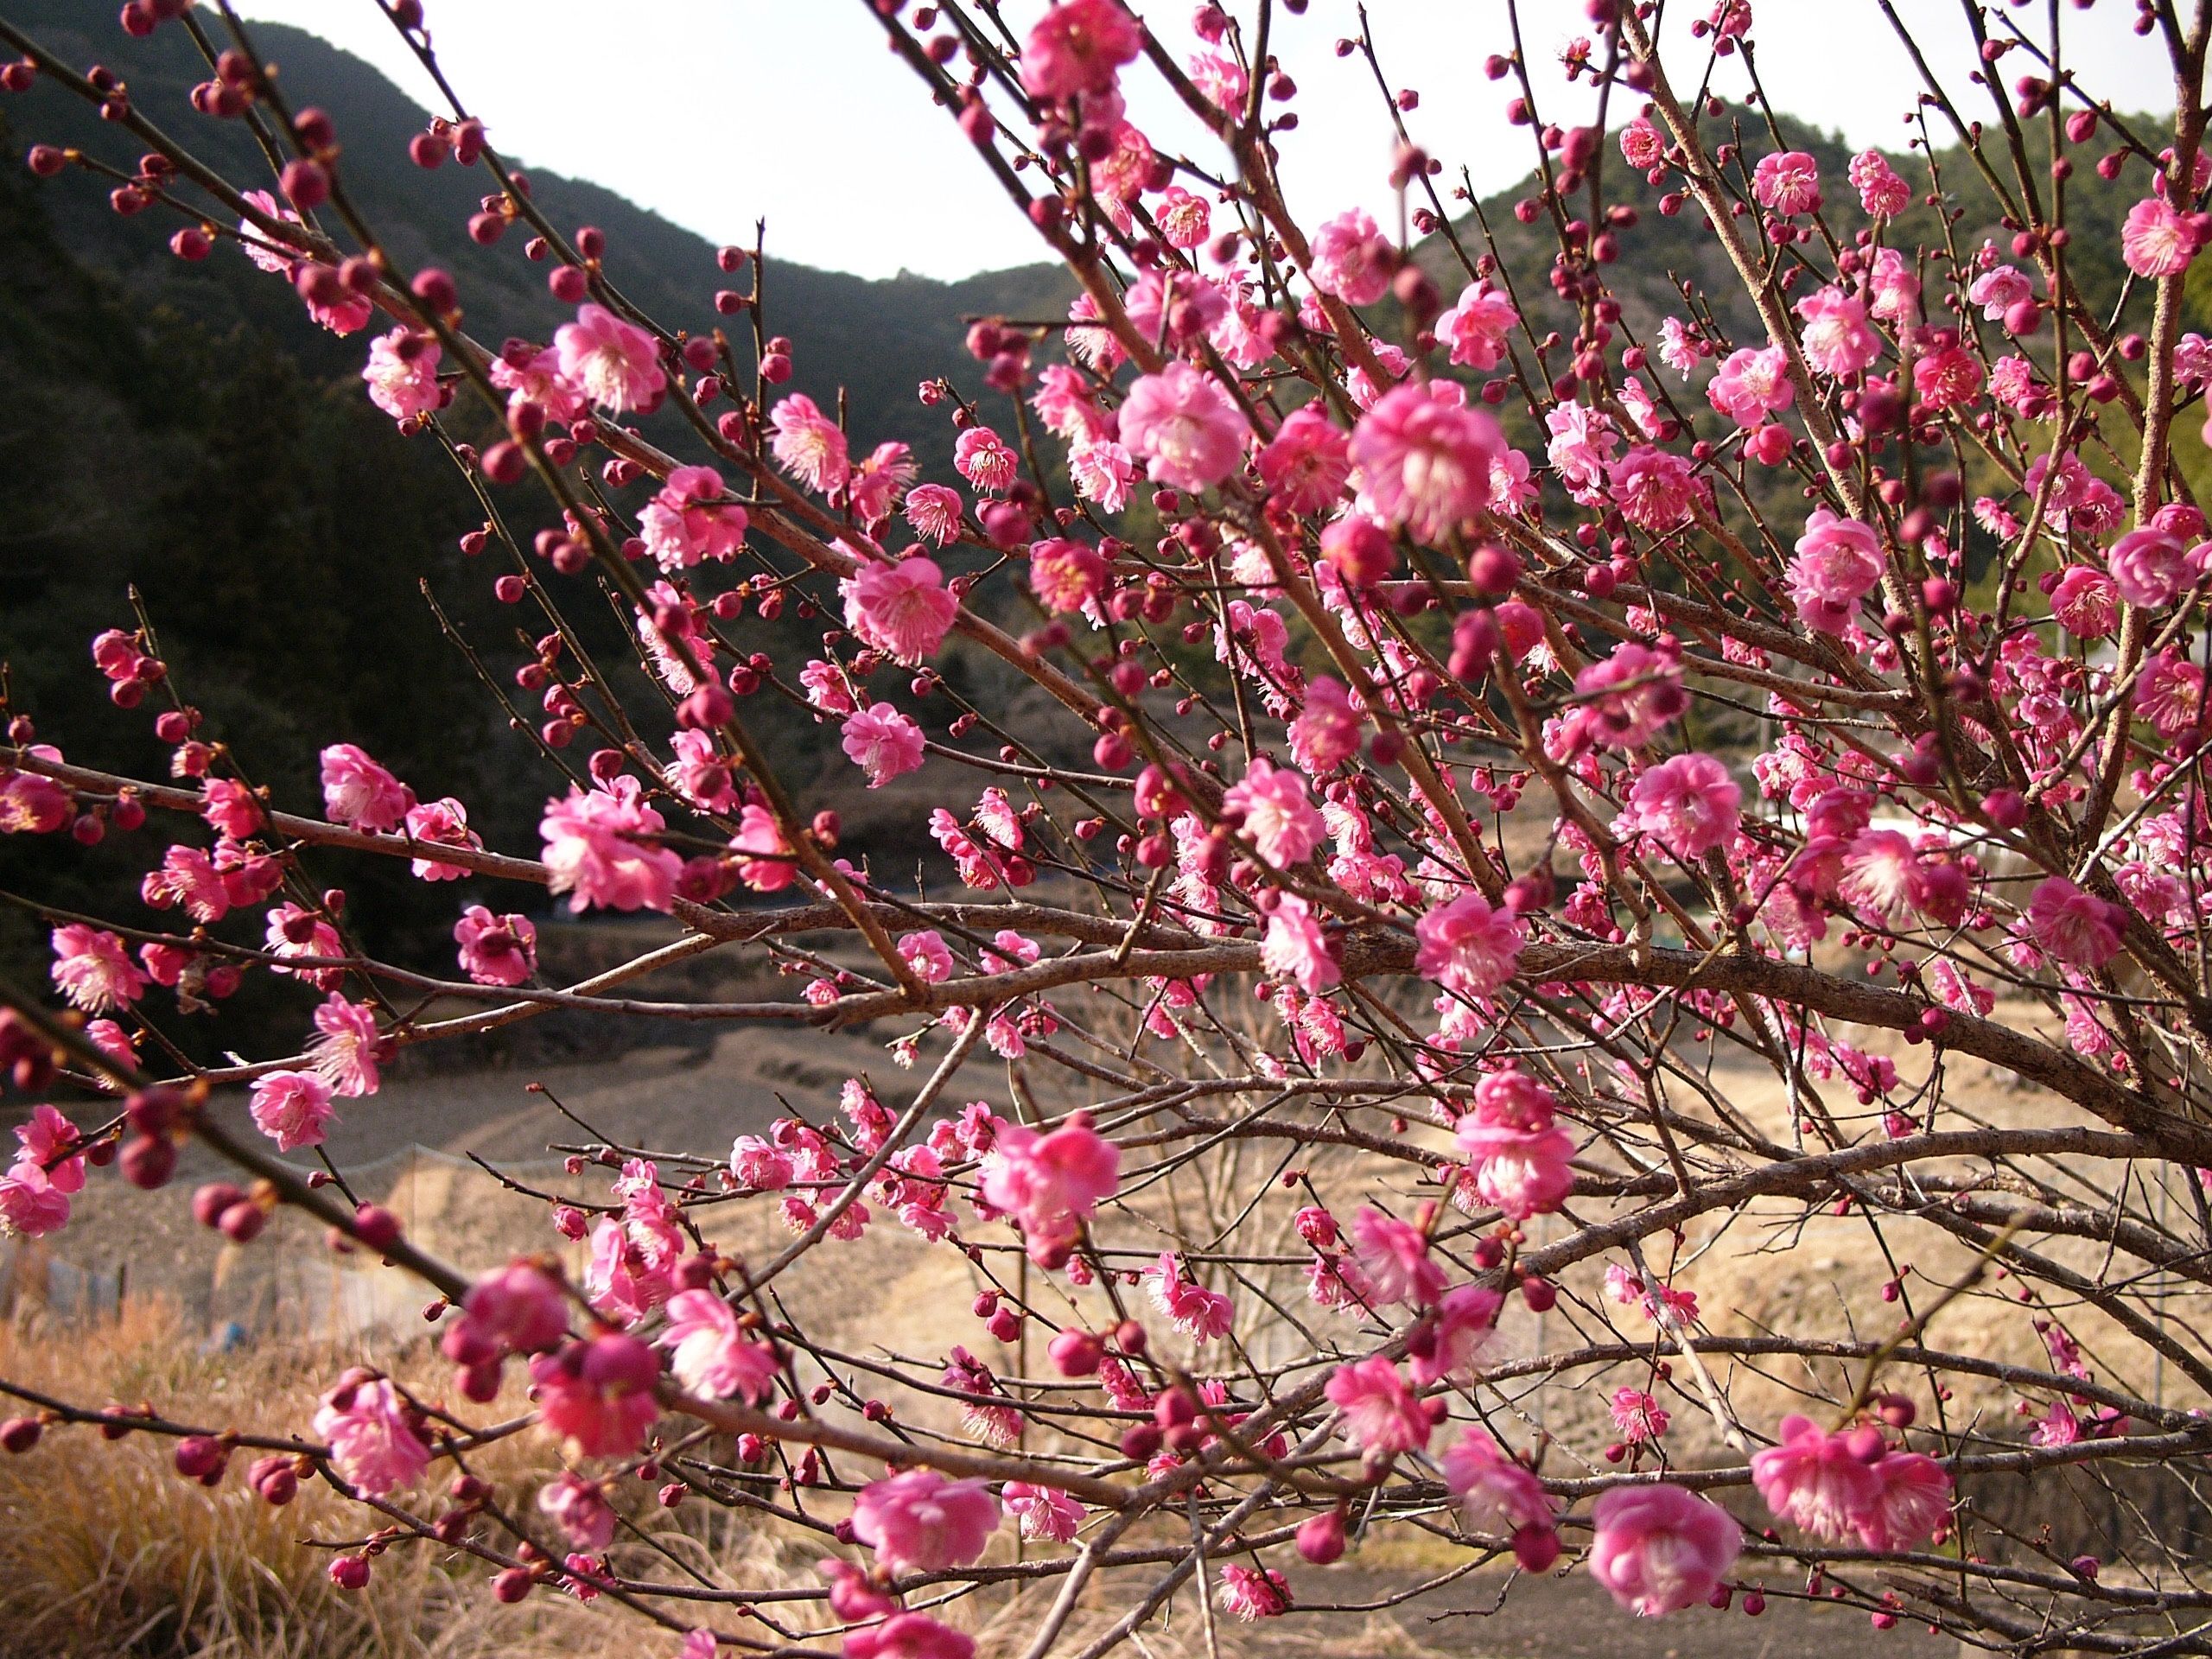 A pink plum tree in full bloom.